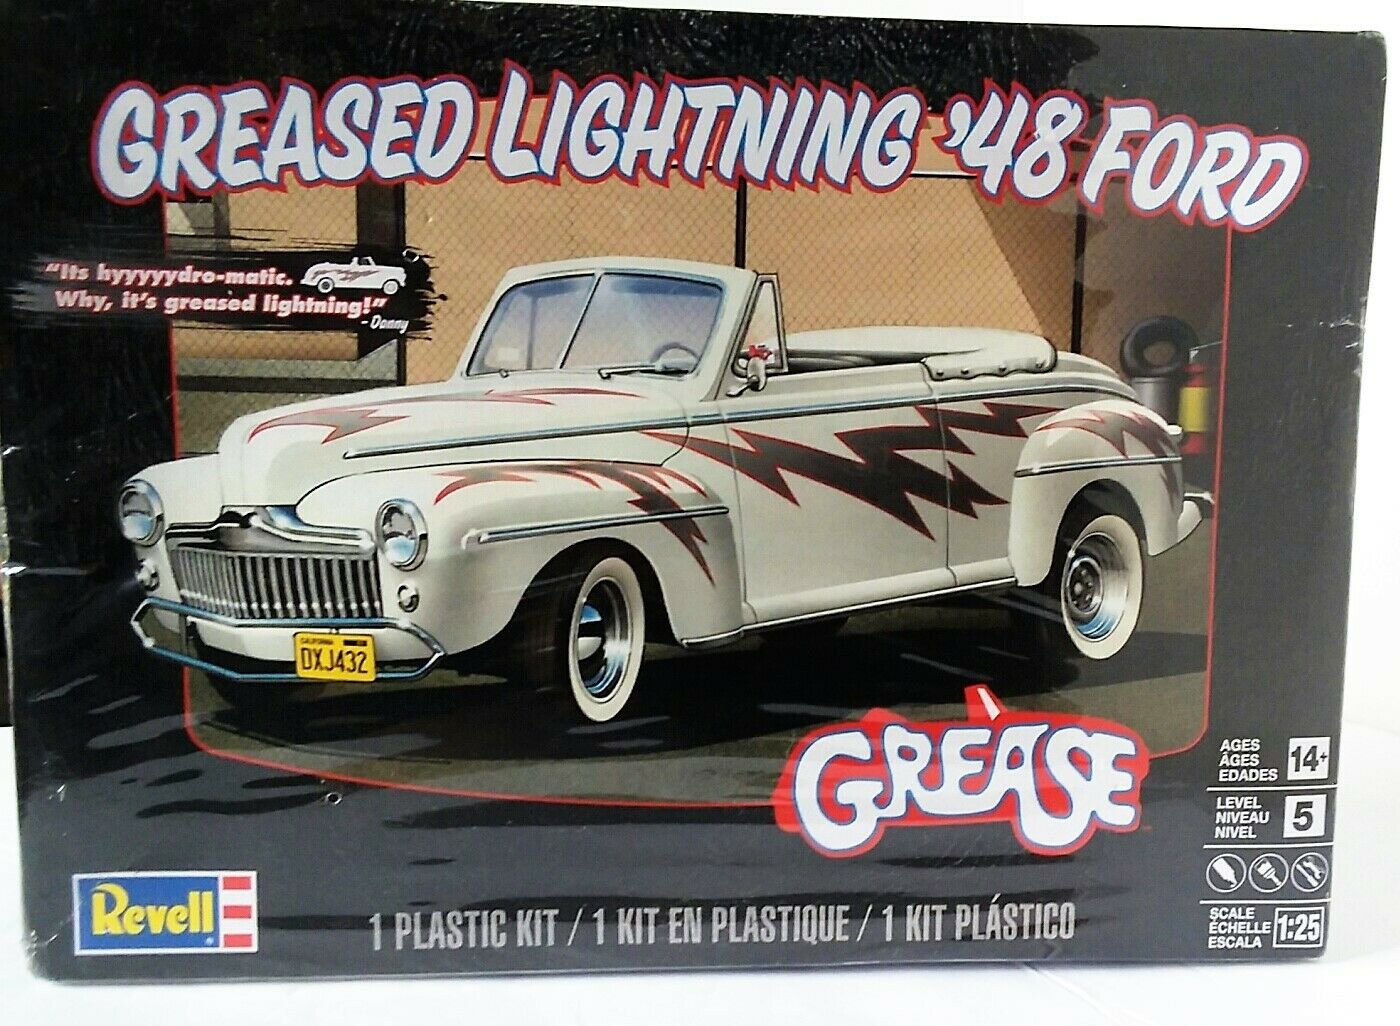 Revell 1/24 Model Greased Lightning '48 Ford From The Movie Grease Sealed Box